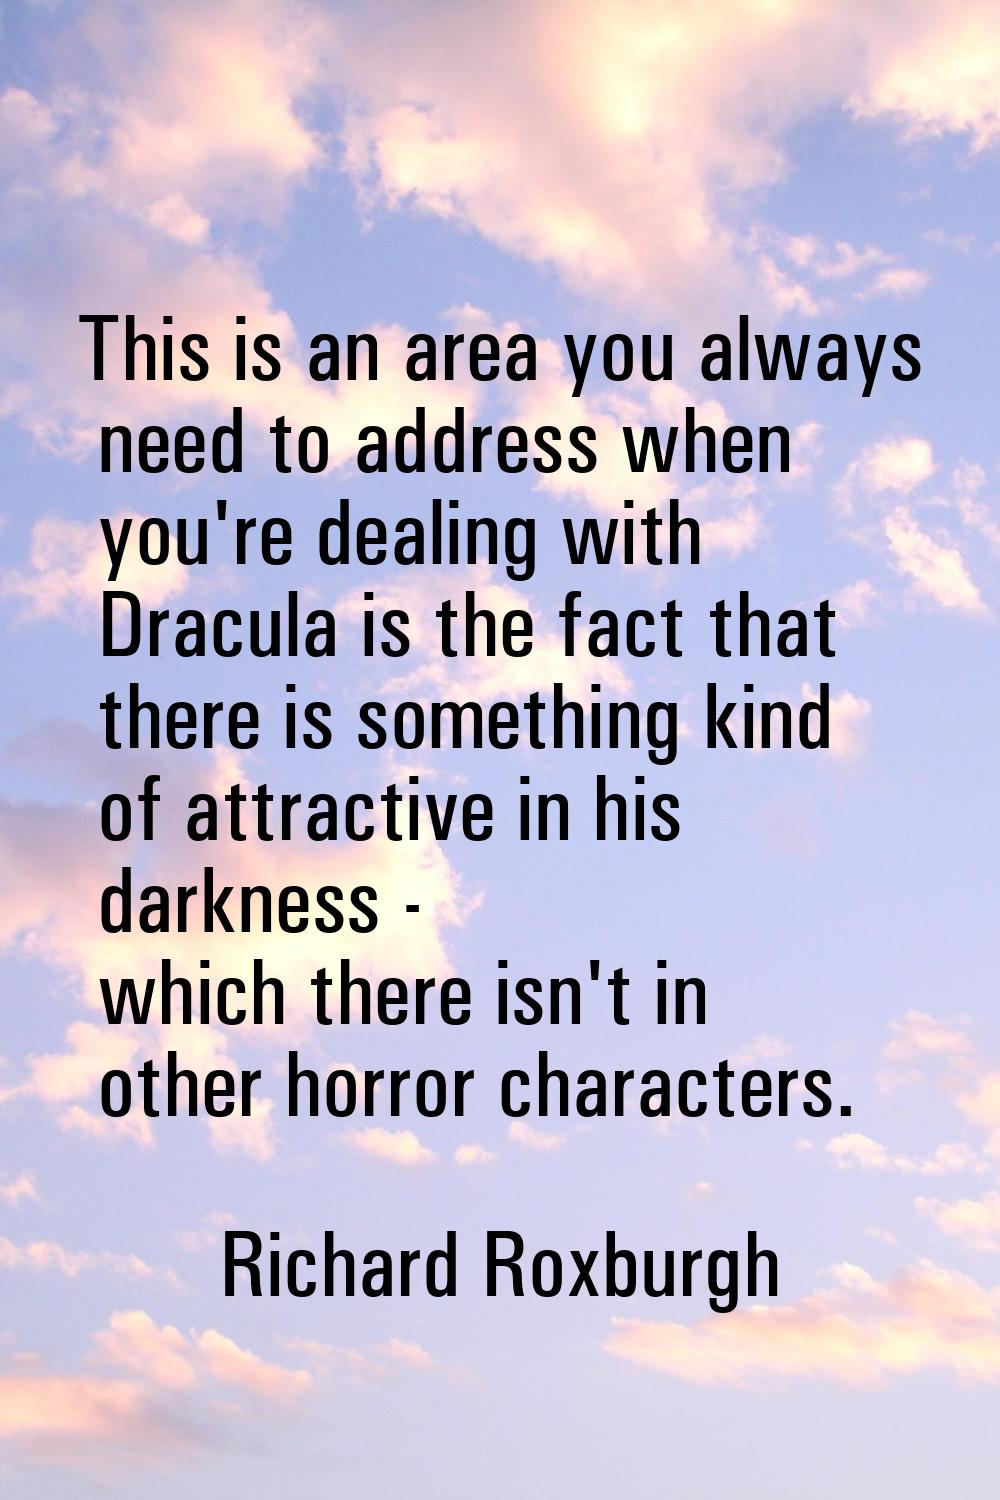 This is an area you always need to address when you're dealing with Dracula is the fact that there 